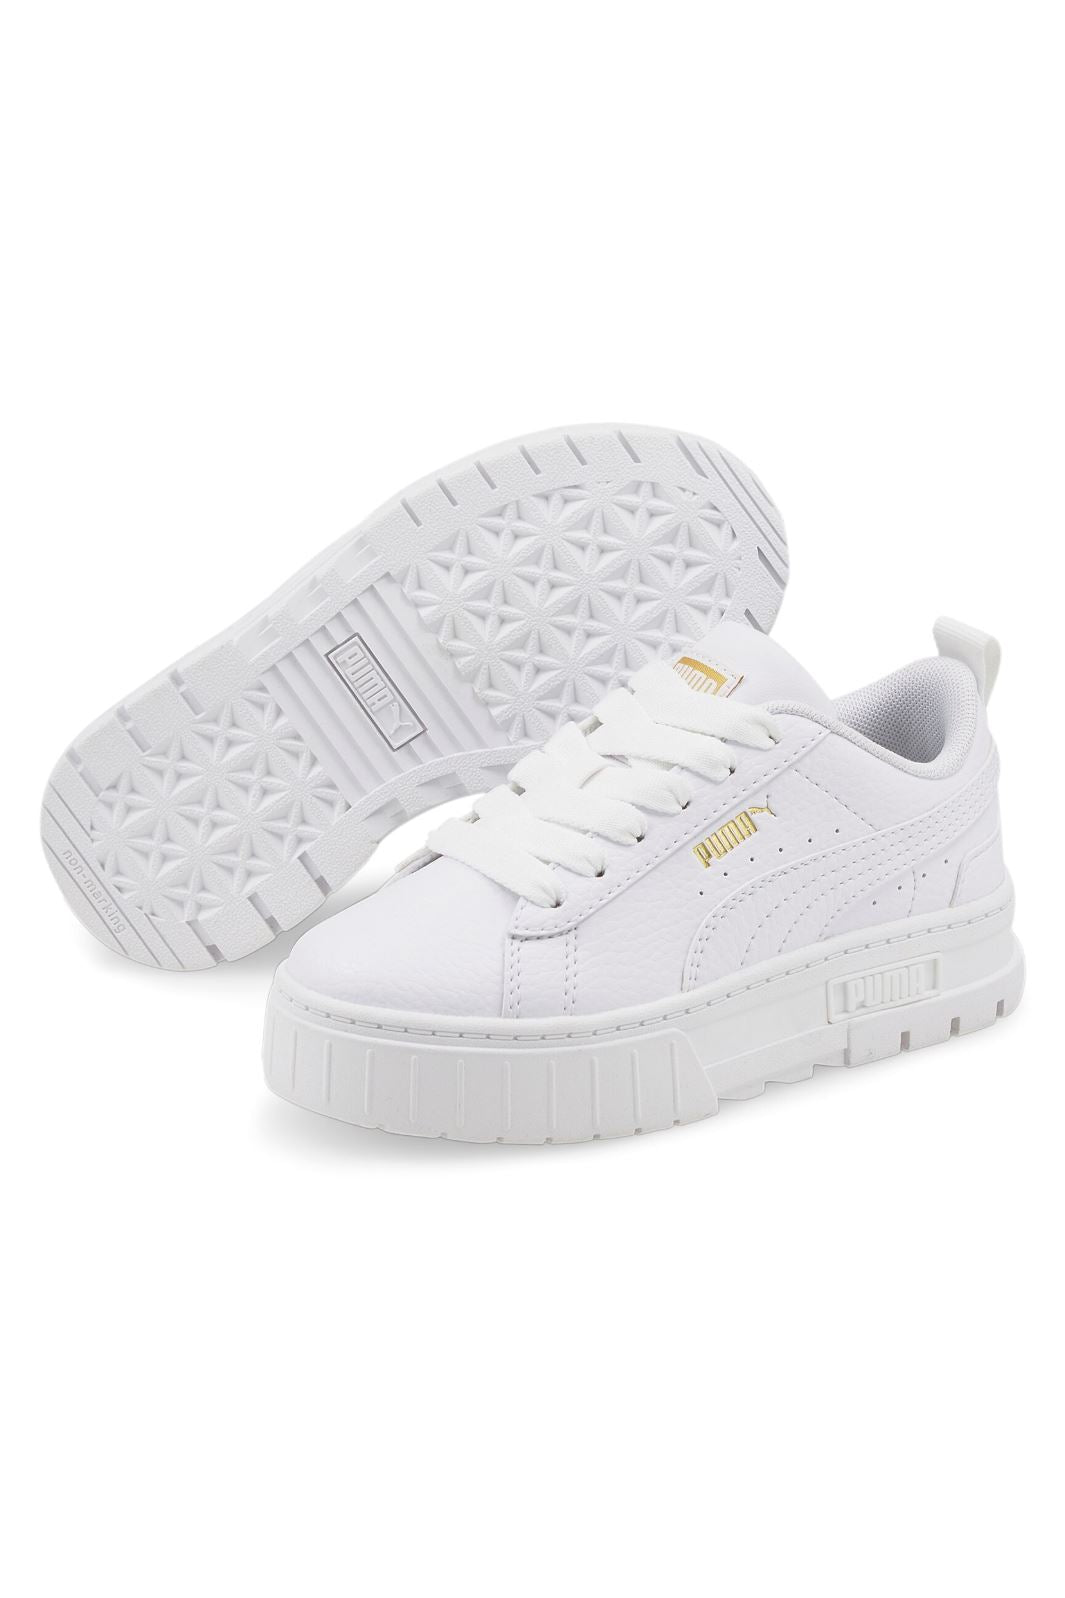 Puma - Mayze Lth PS - White Team Gold Sneakers 